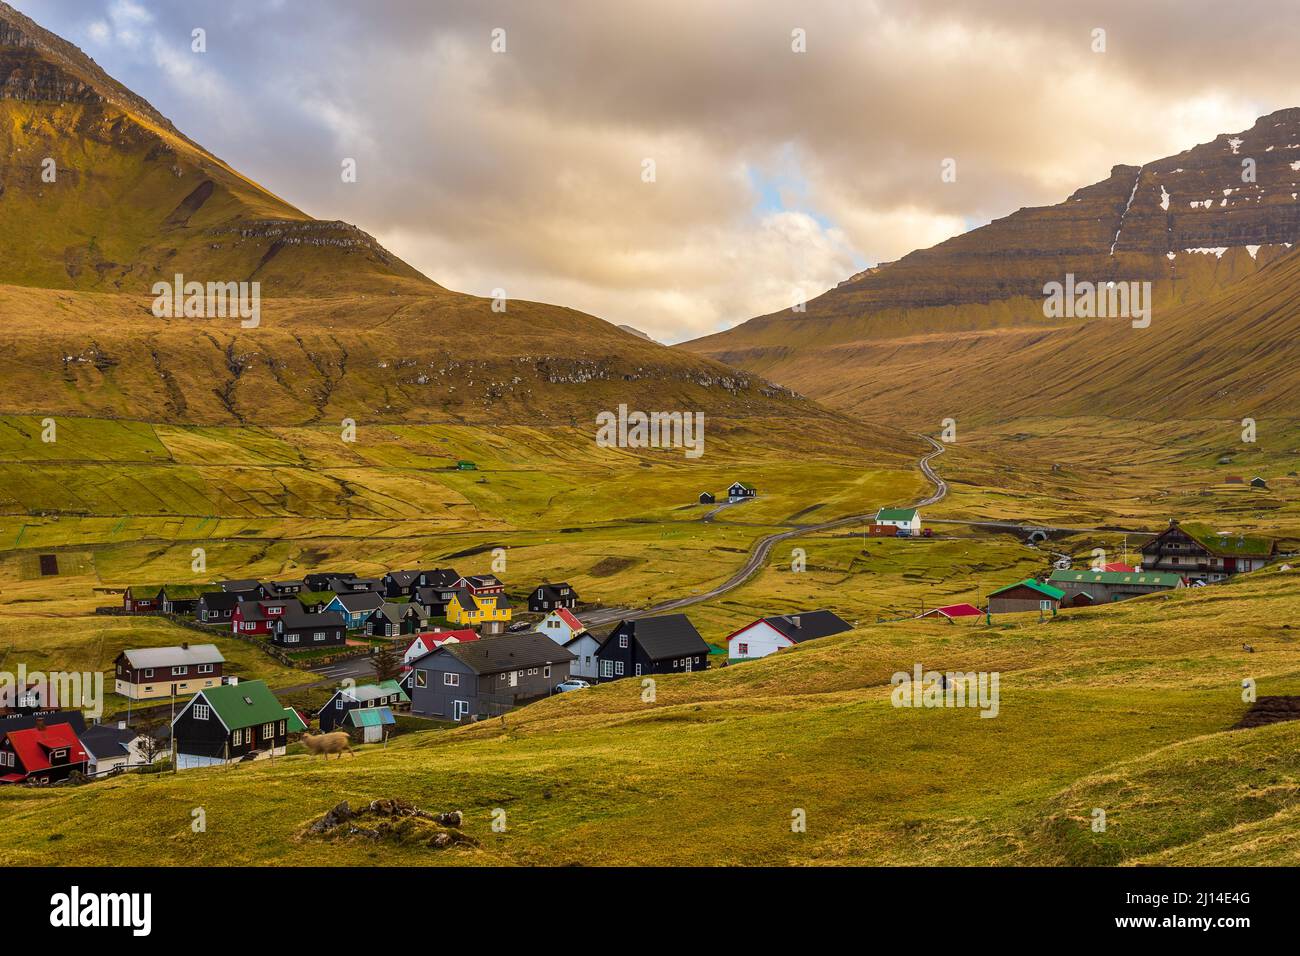 Small village Gjogv situated on the slope of the mountain on Eysturoy ...